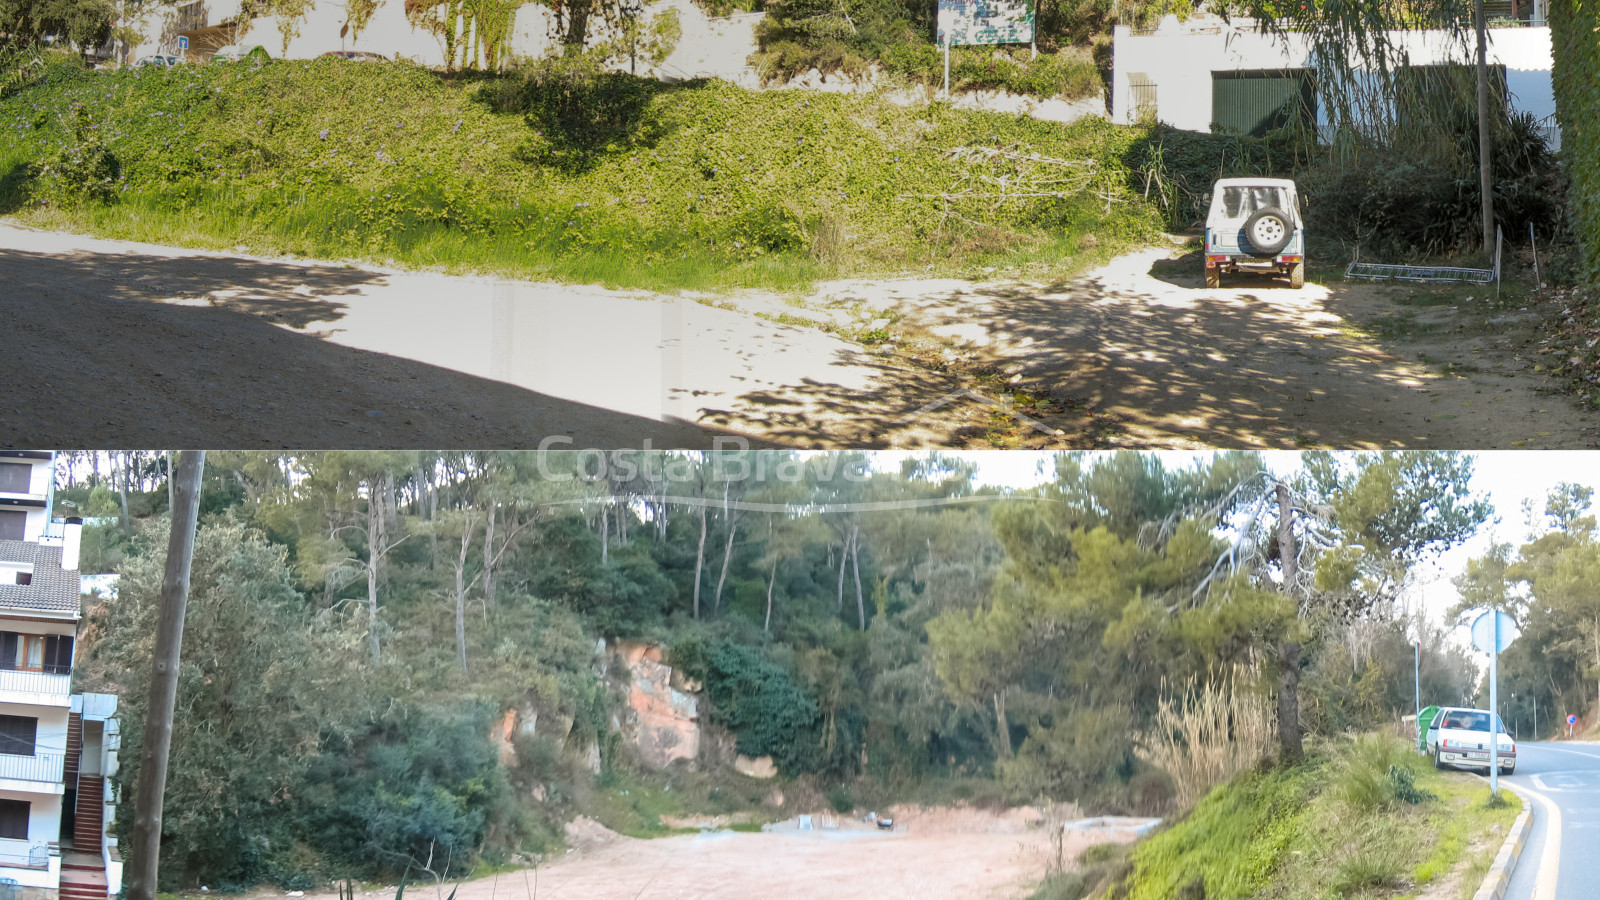 Land for sale only 250 metres from Tamariu beach